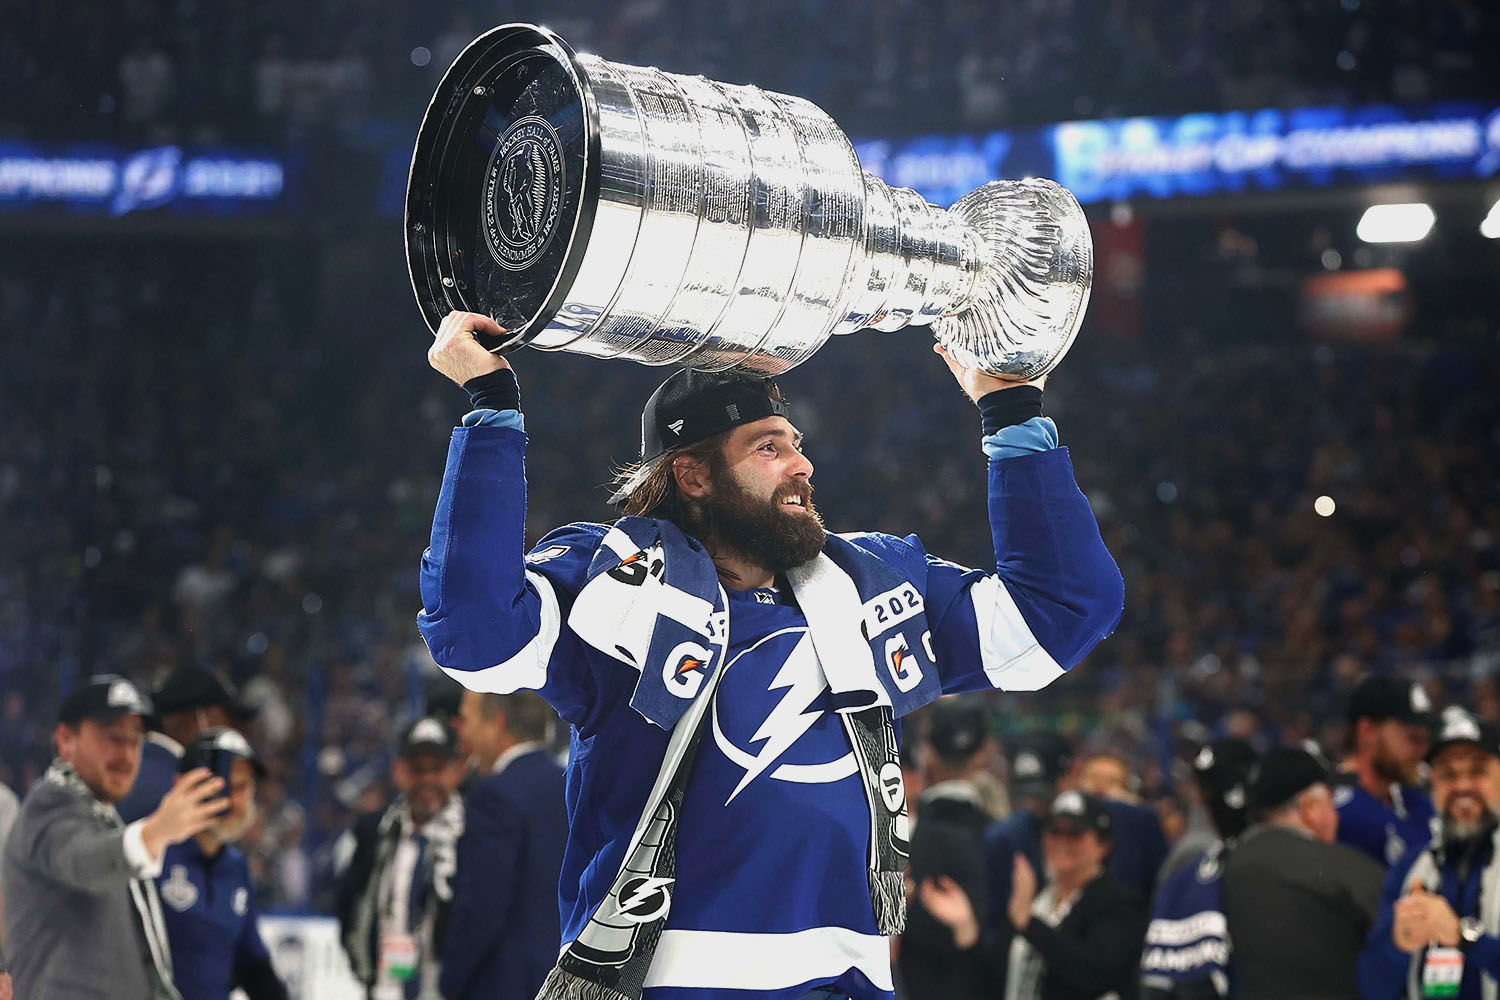 Maroon becomes back-to-back Cup winner with Blues, Lightning